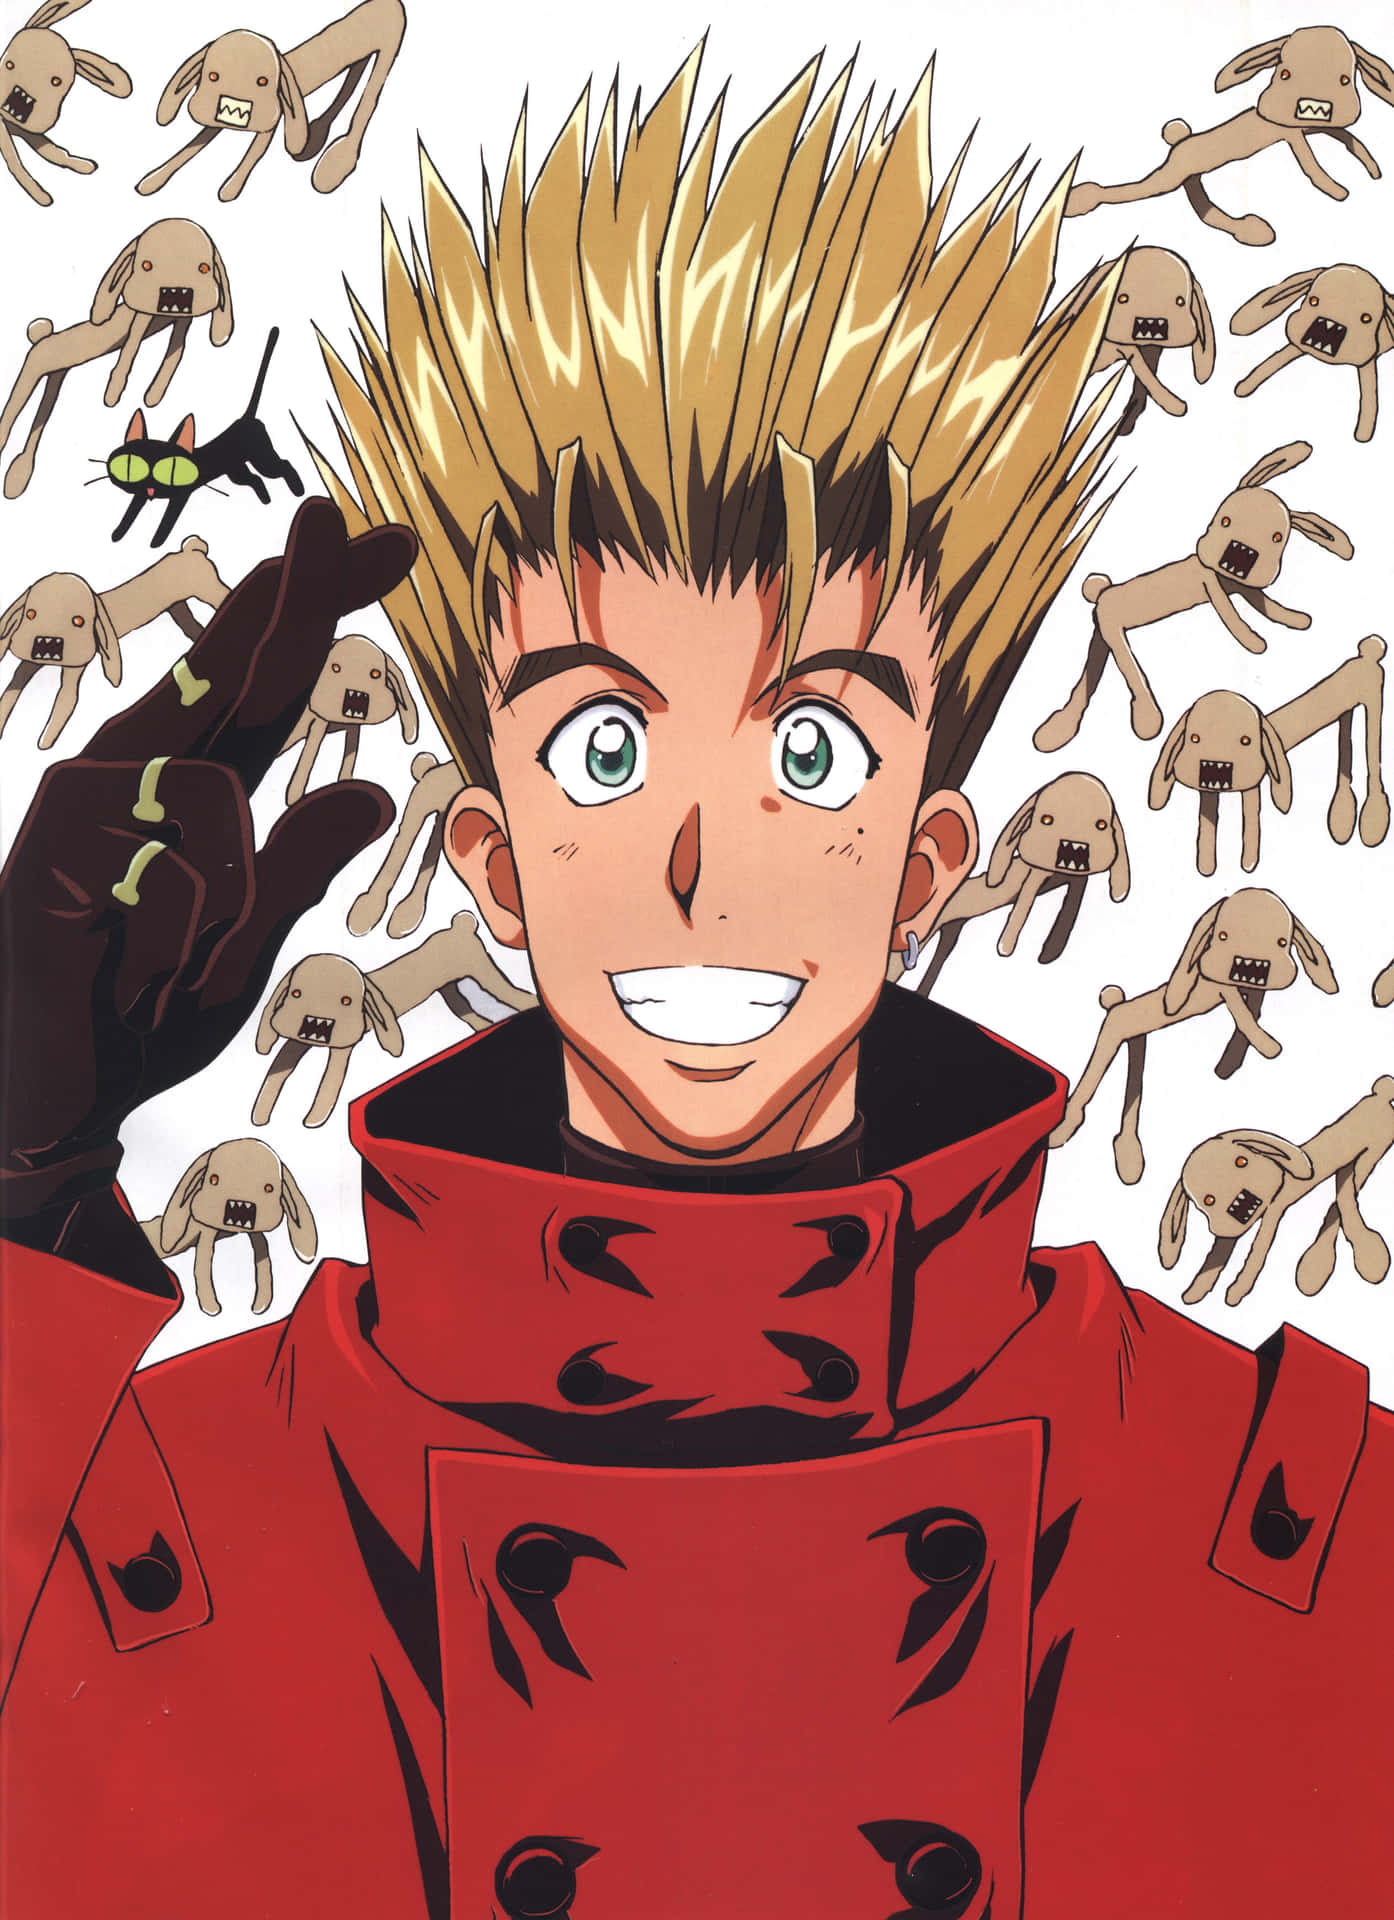 Vash The Stampede standing heroically with his revolver amidst a desolate landscape Wallpaper